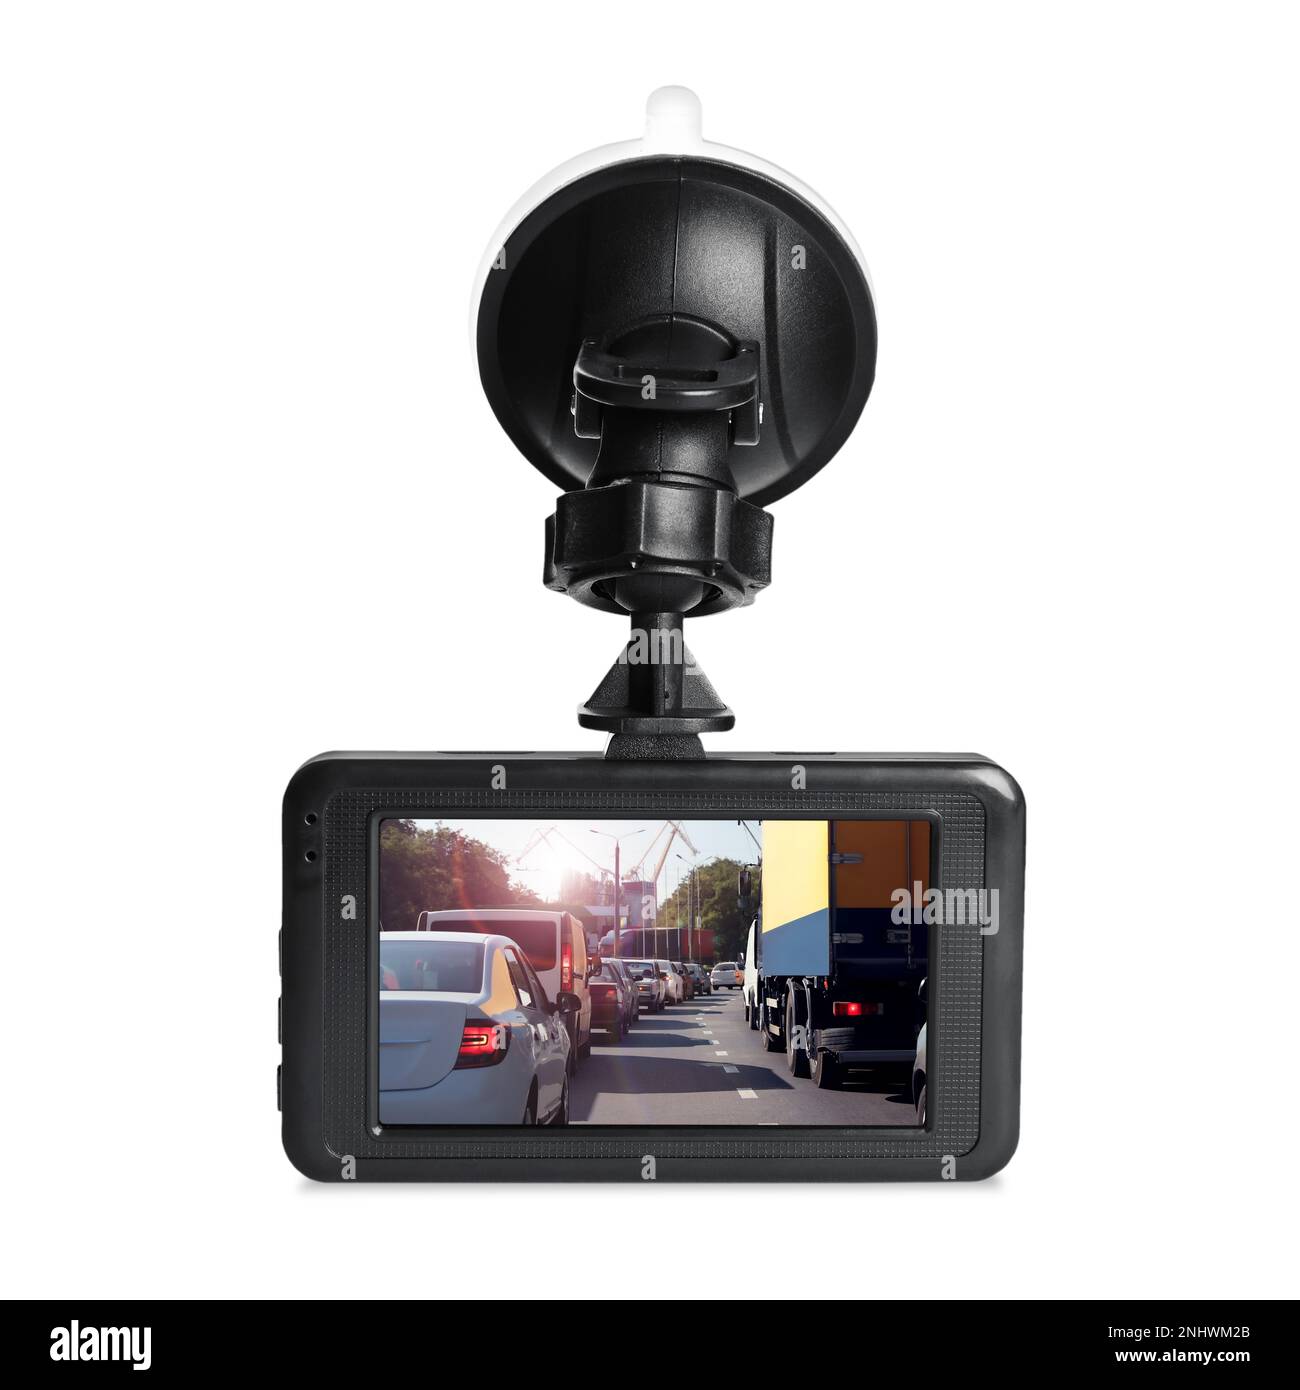 Modern car dashboard camera with photo of road on screen against white background Stock Photo